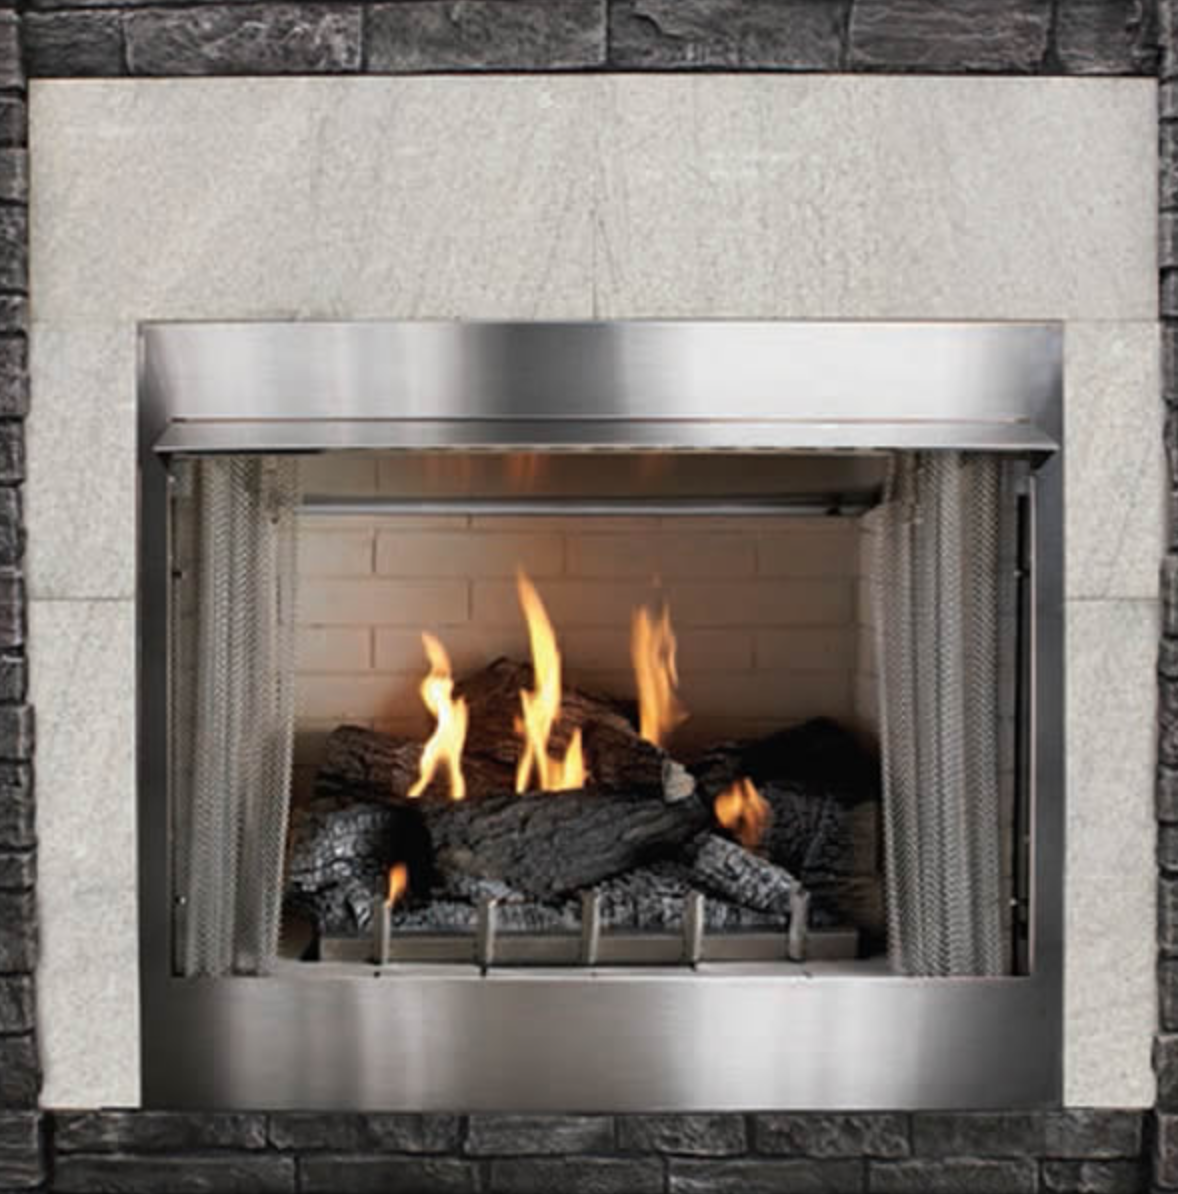 Pizza Oven Fireplace Combo New Empire Carol Rose 42" Traditional Vent Free Stainless Steel Outdoor Fireplace Op42fp